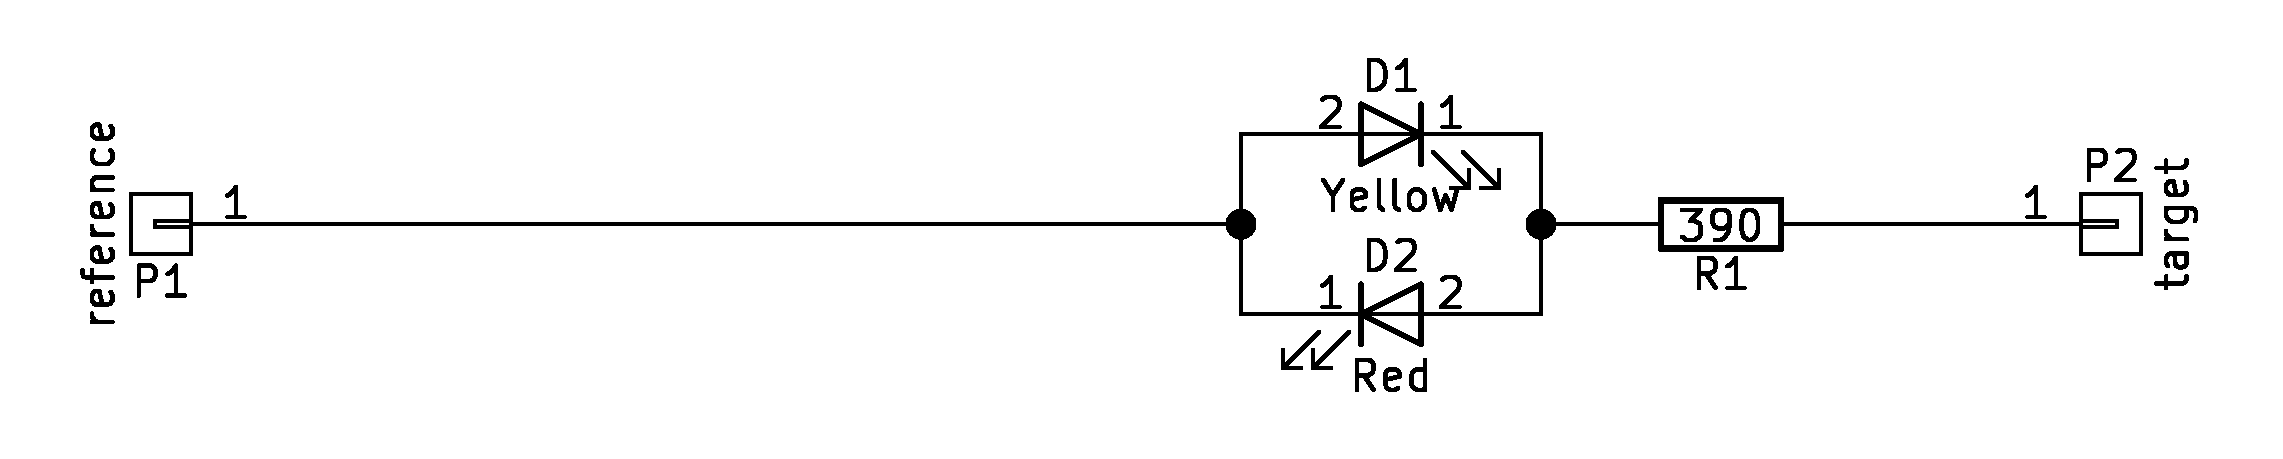 A schematic of the logic probe